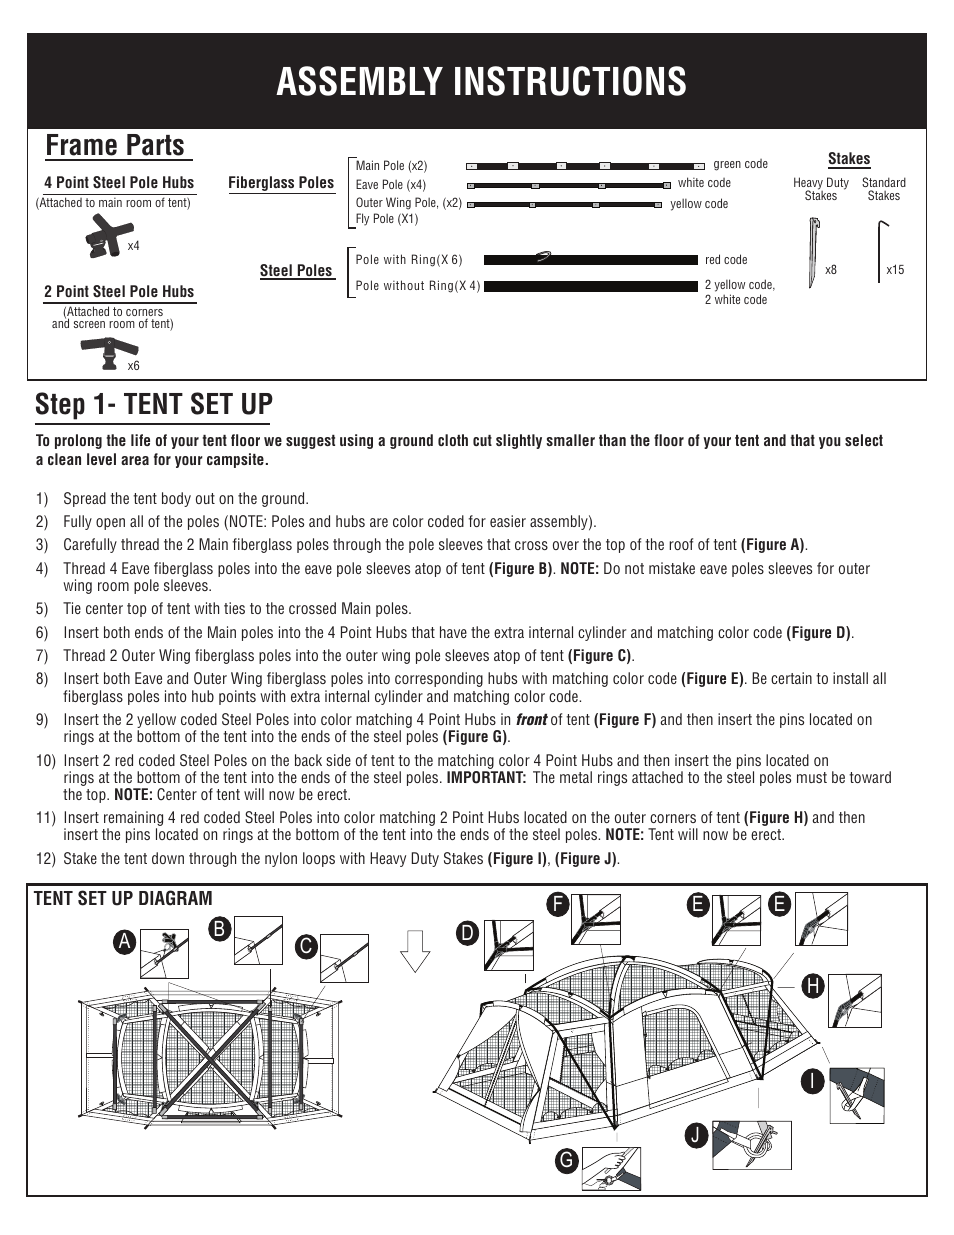 Assembly instructions, Frame parts, Step 1- tent set up | Ab d e f, Hg i j c | Giga Tent FT 021 User Manual | Page 2 / 8